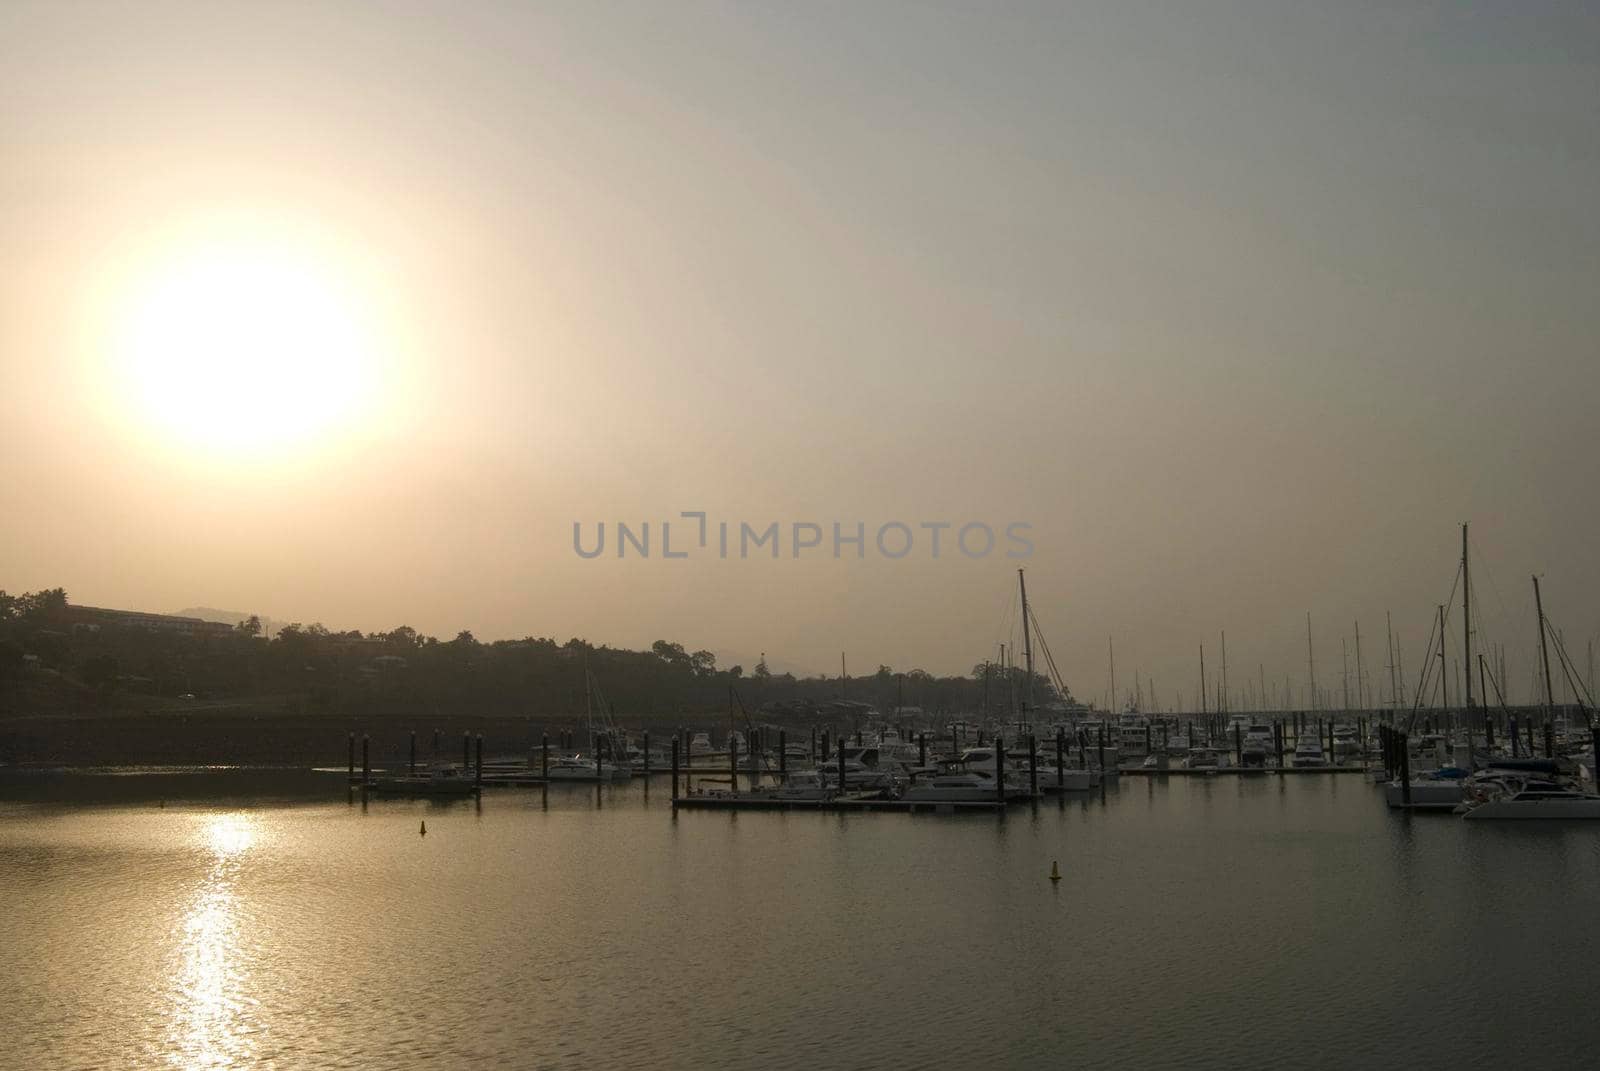 The sun makes a valiant effort to shine through thick hazy smog caused by air pollution over a coastal marina with small boats and pleasure yachts moored at the jetties